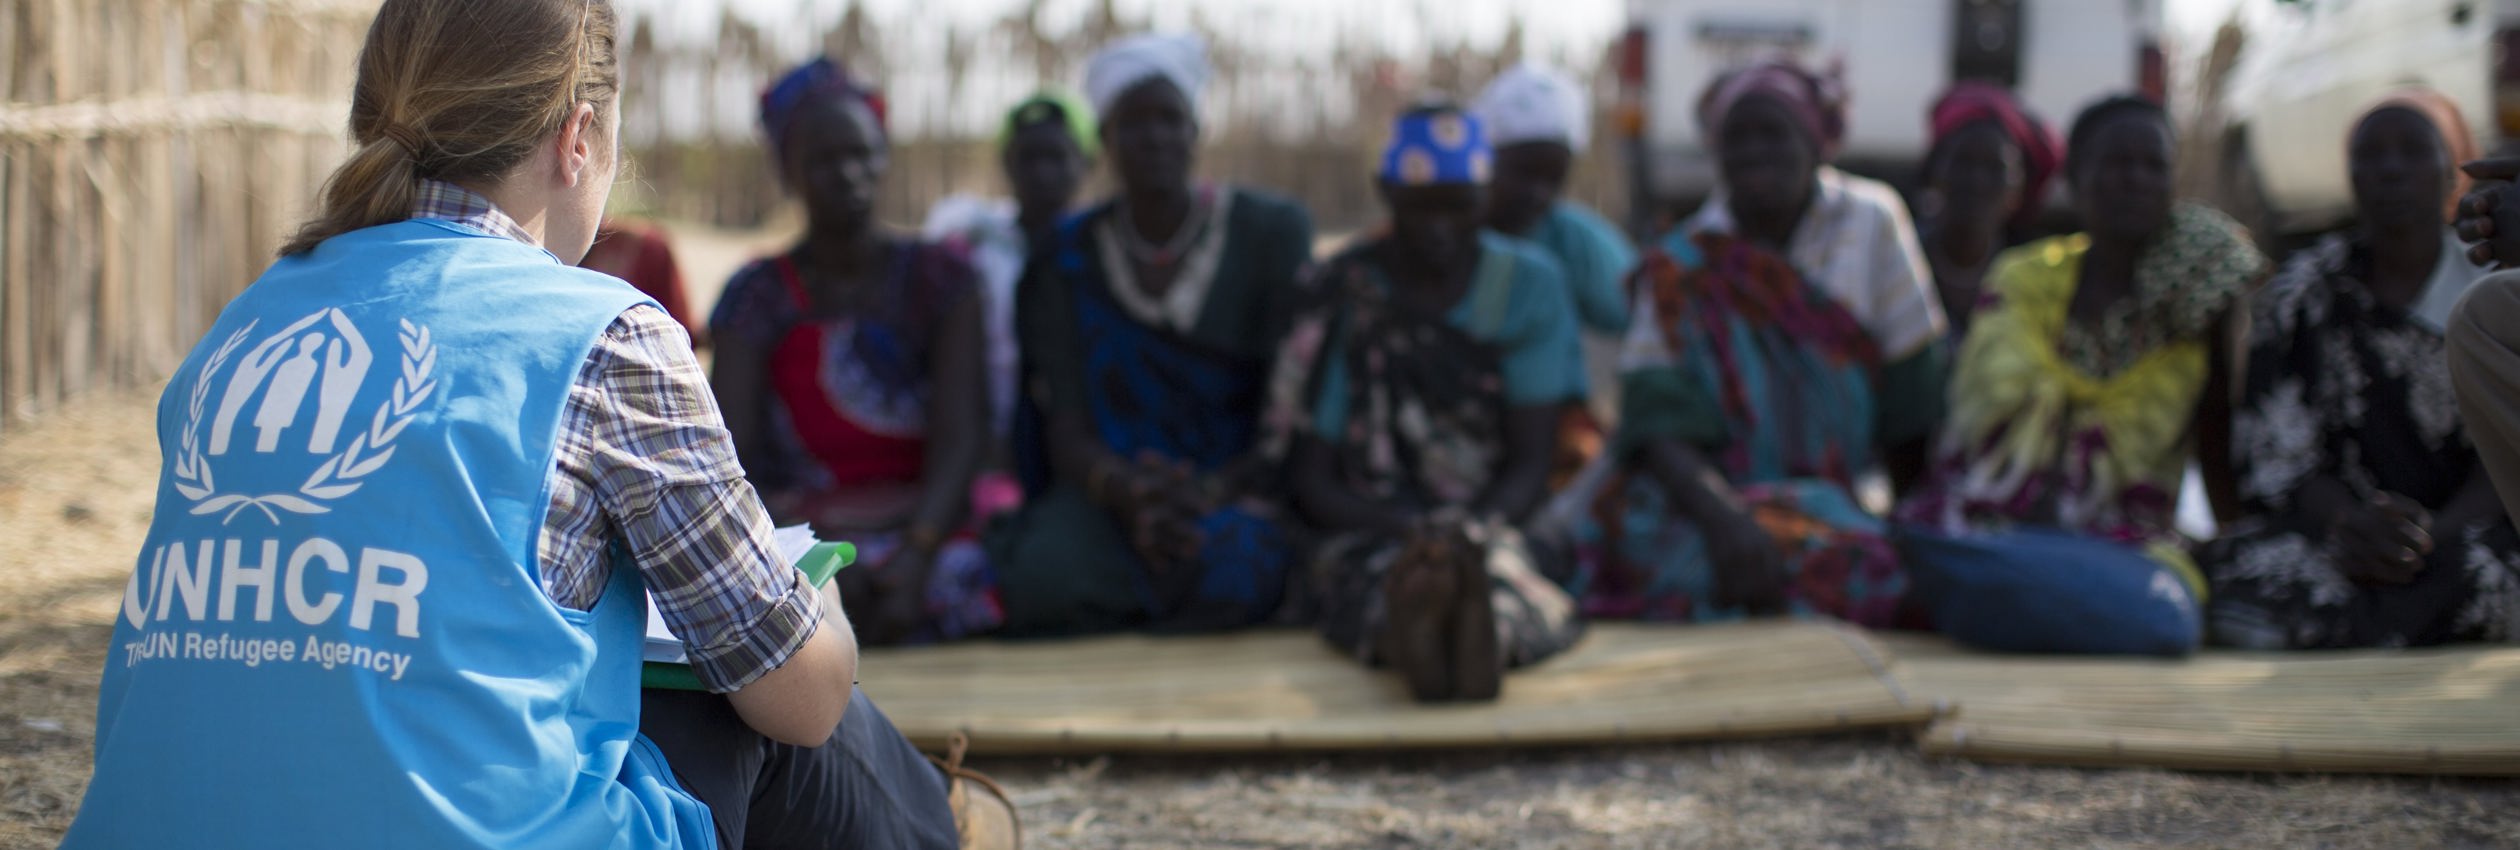 UNHCR staff Kate Kakela meets with a group of displaced women in Thonyor, South Sudan’s Unity State.